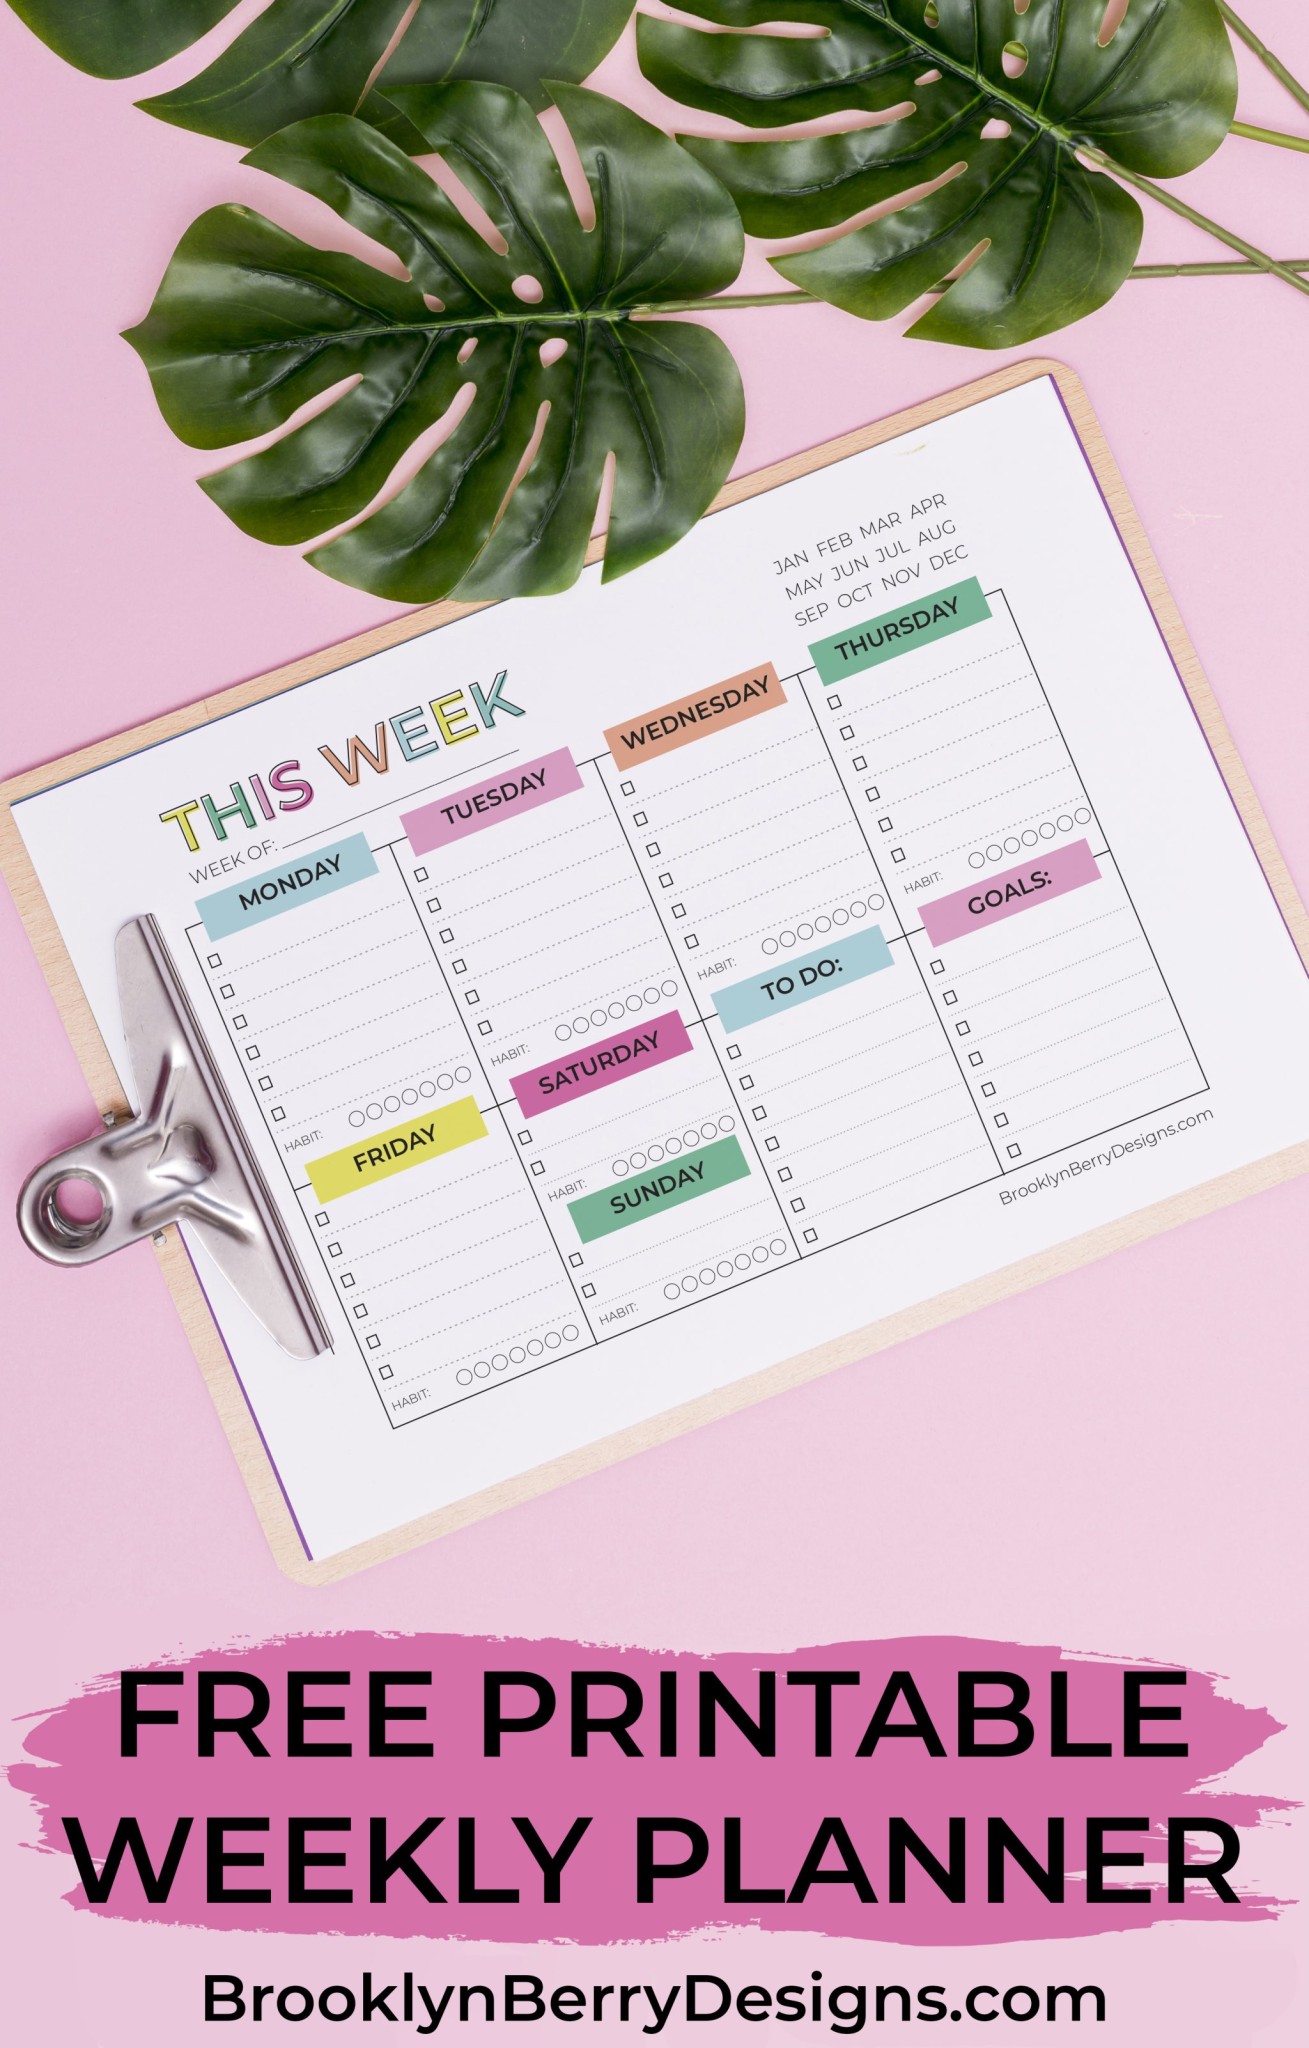 Free Weekly Planner Printable - master your goals with this weekly printable to keep track of appointments, to-dos, and habits. via @brookeberry